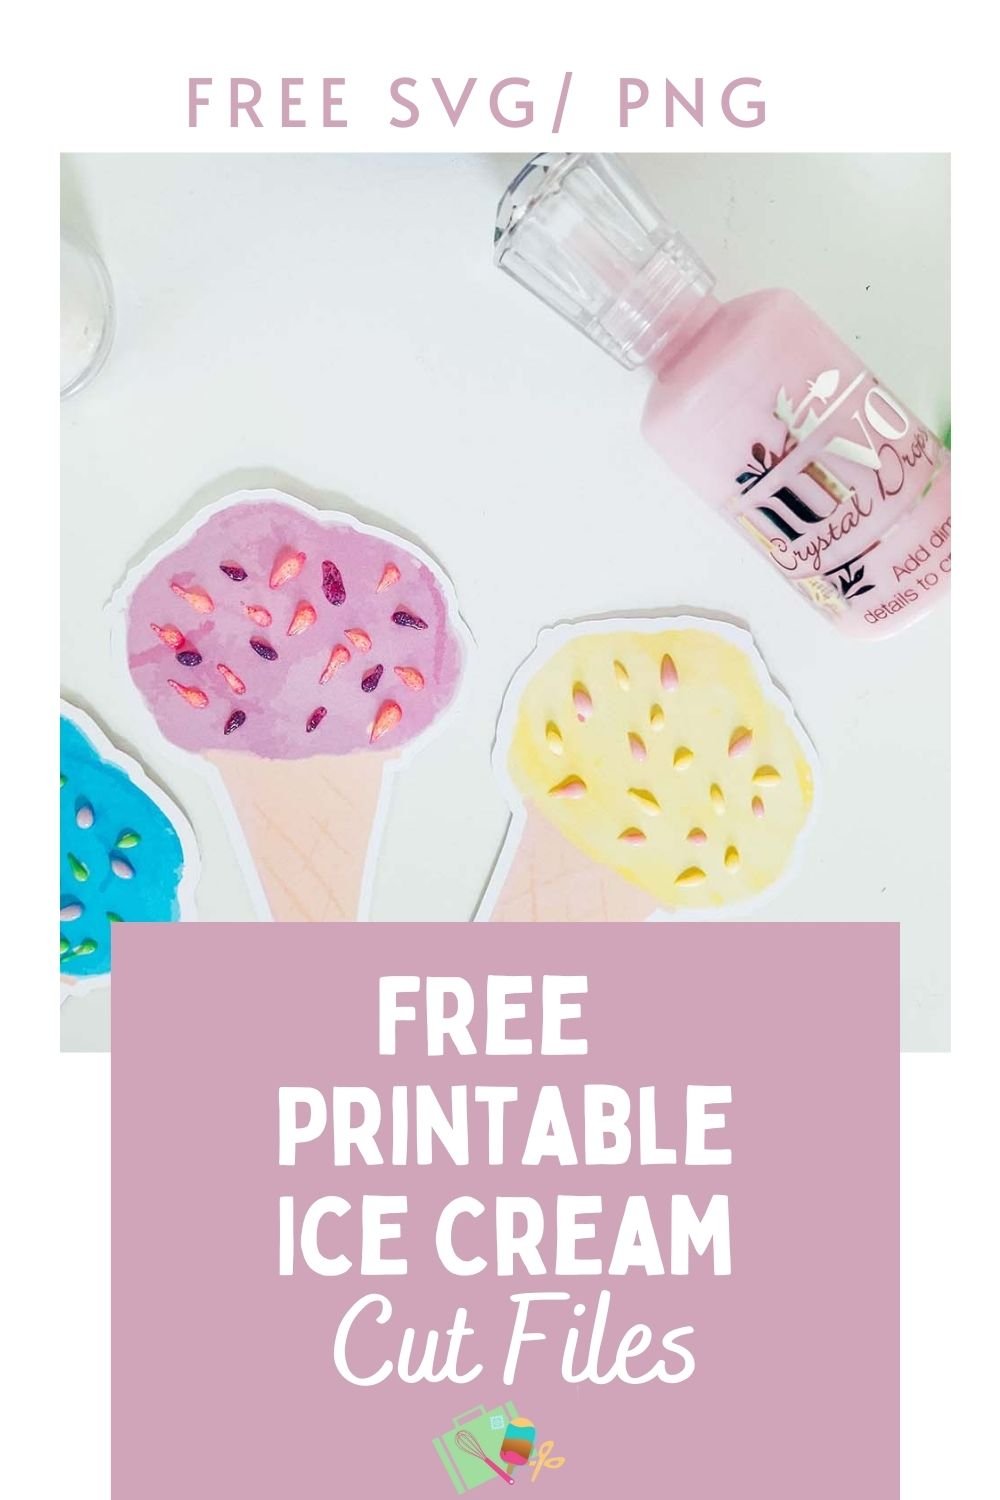 Free printable Ice Cream, PNG svg file for print and cut and crafting -2